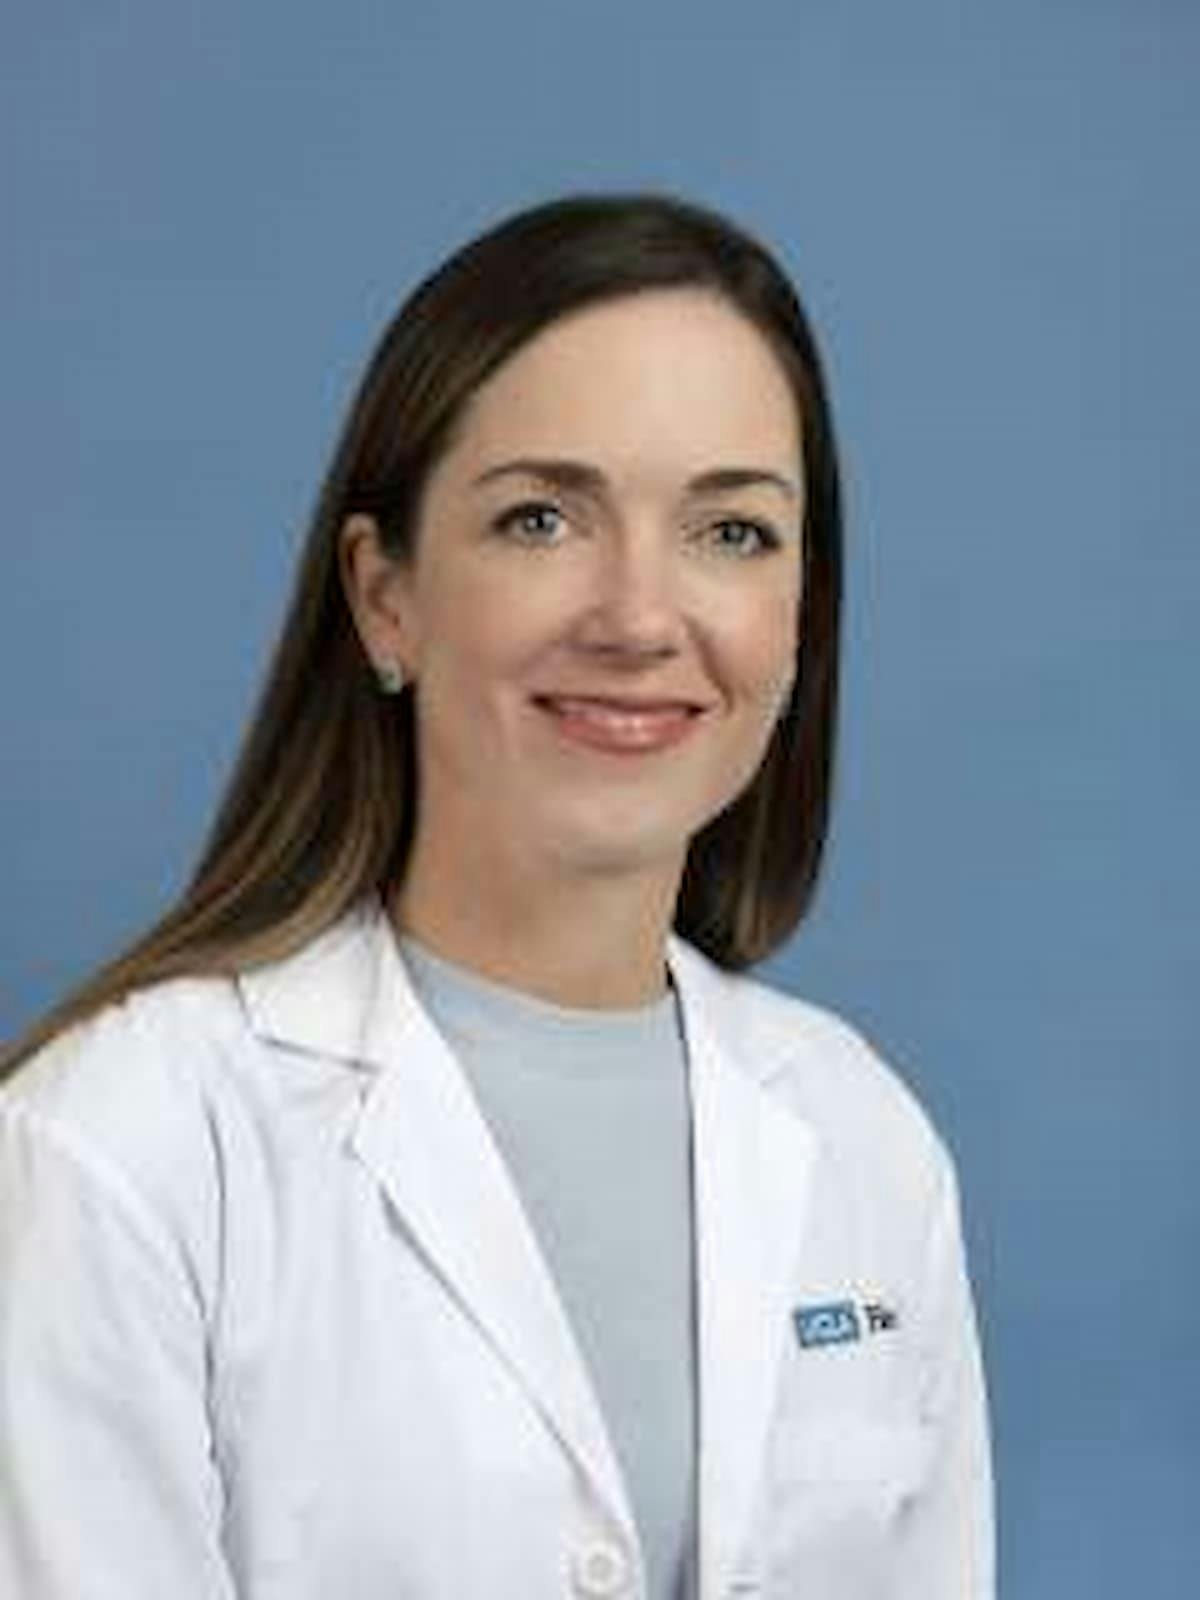 Sara Hurvitz, MD, director of the Breast Cancer Clinical Trials Program at the University of California Los Angeles